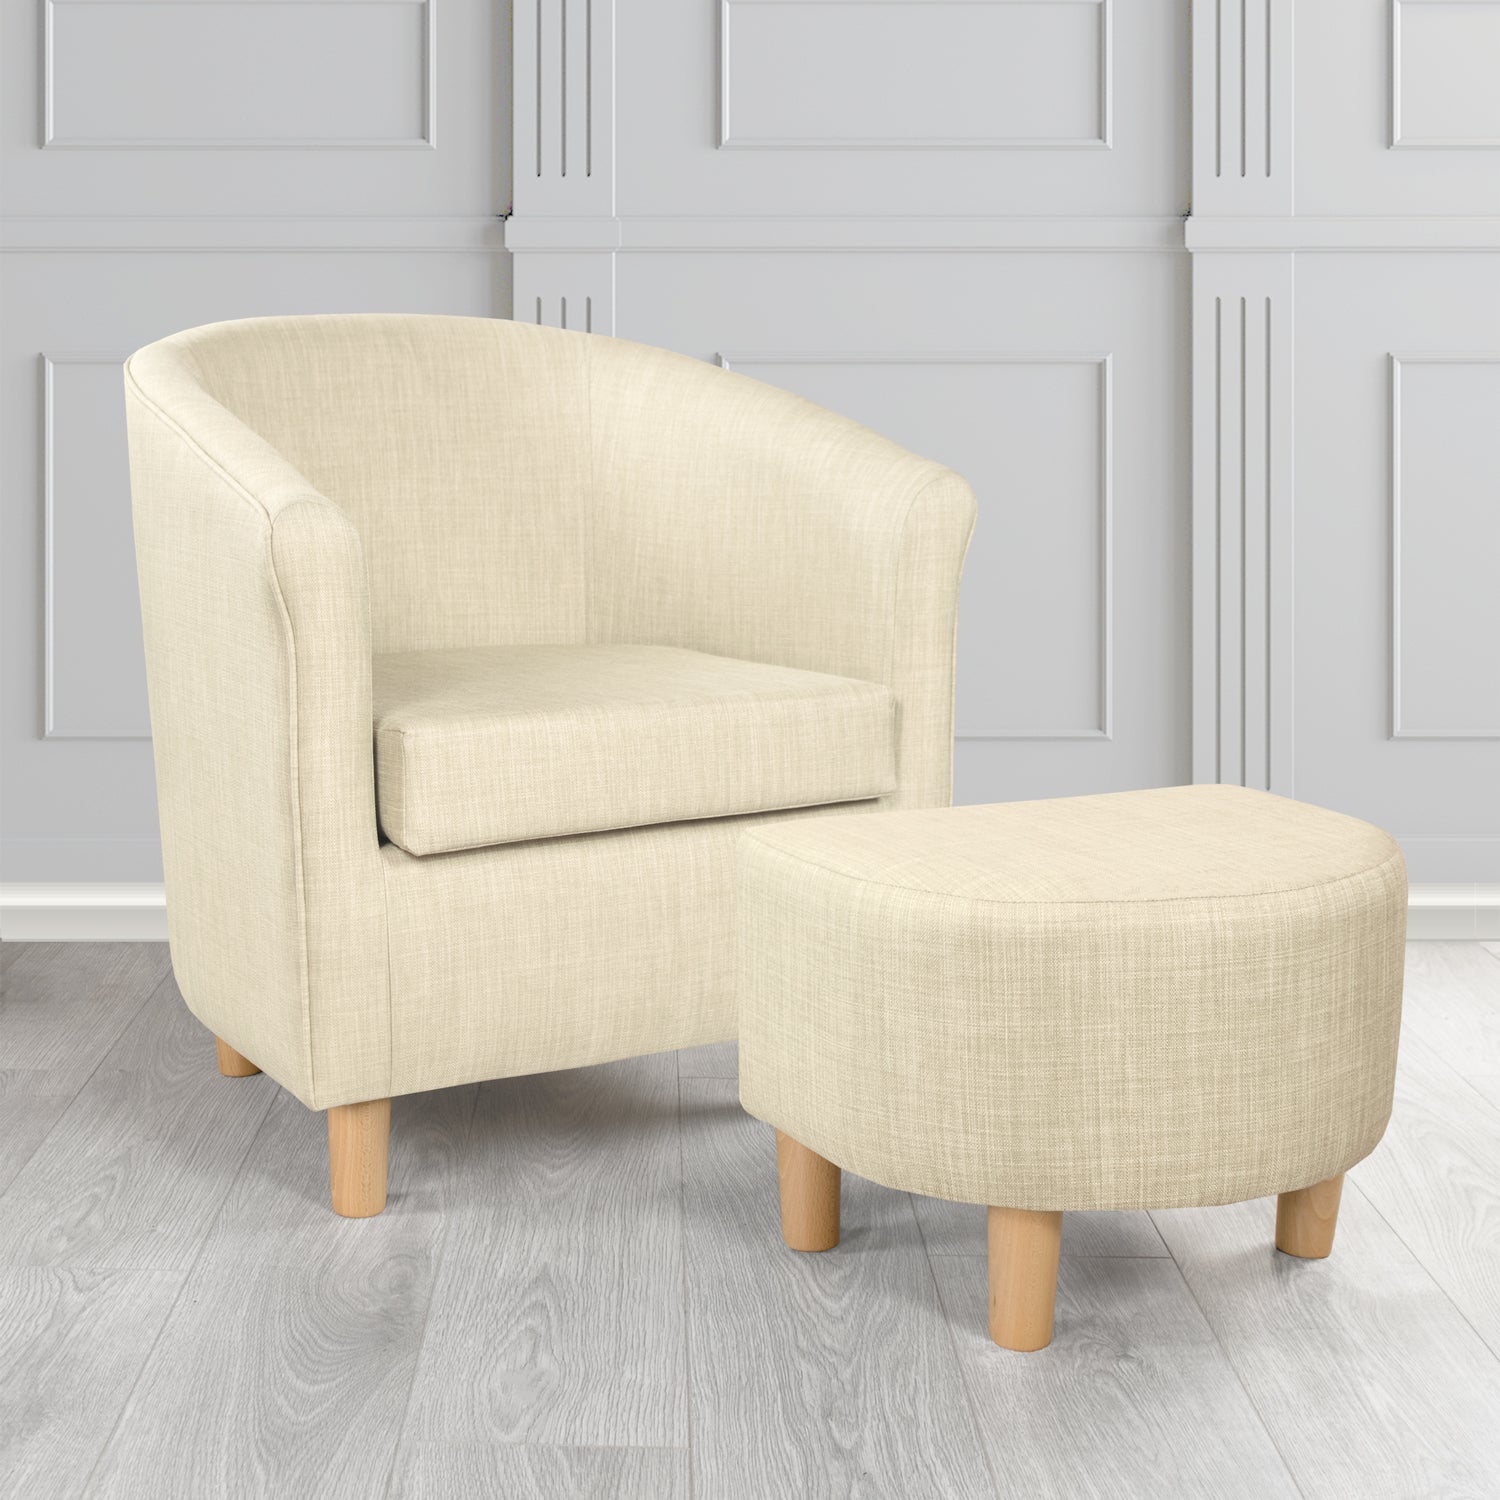 Tuscany Charles Cream Linen Plain Fabric Tub Chair with Dee Footstool Set - The Tub Chair Shop